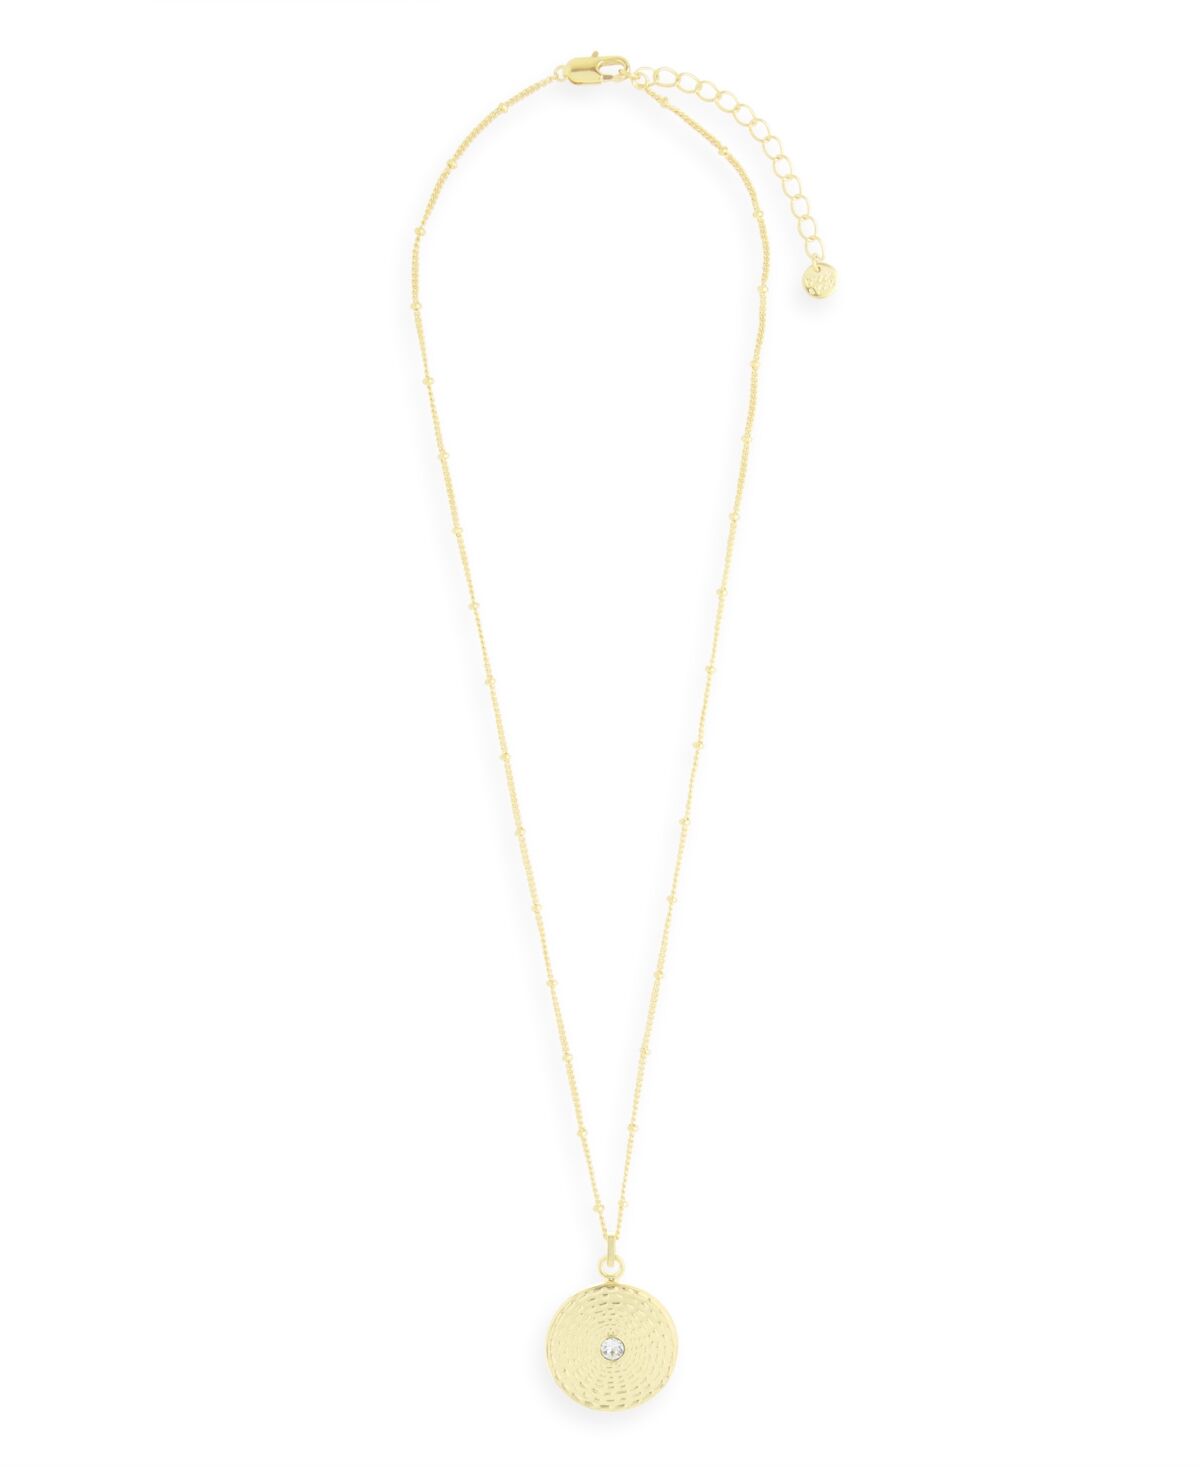 Brook & York Catalina 14K Gold Plated Coin Pendant Necklace - Gold-Plated